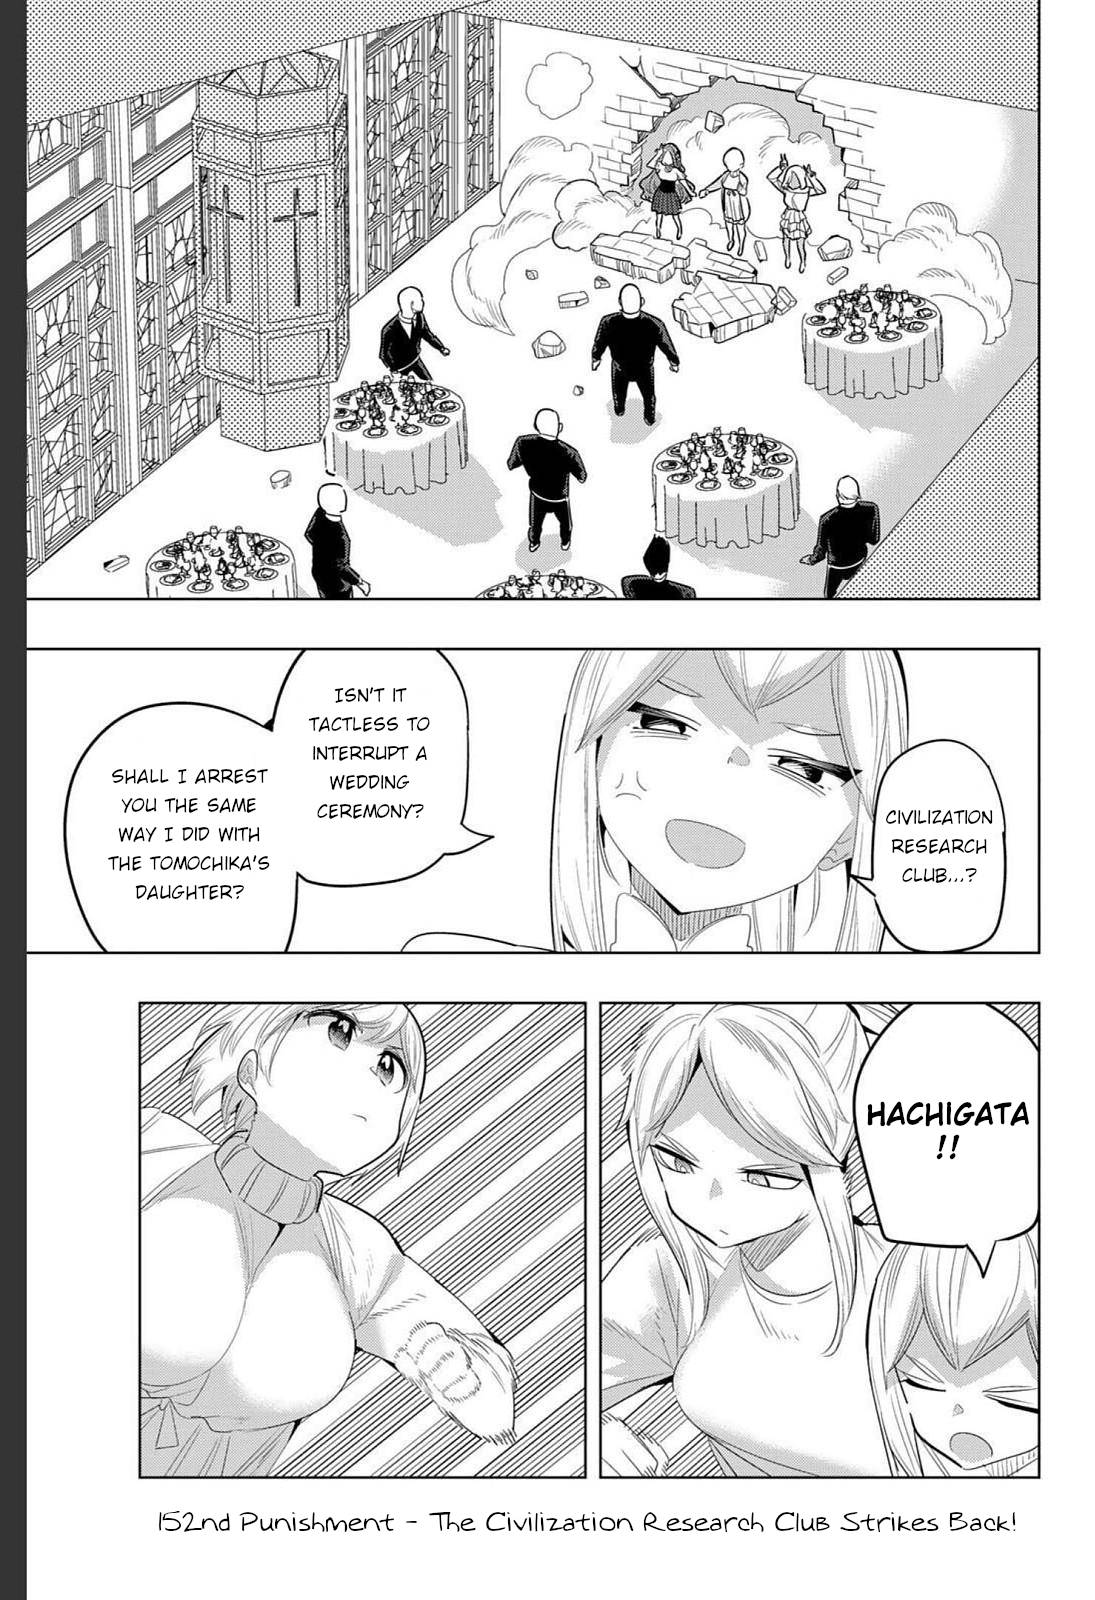 The Quintessential Quintuplets, Chapter 93 - English Scans